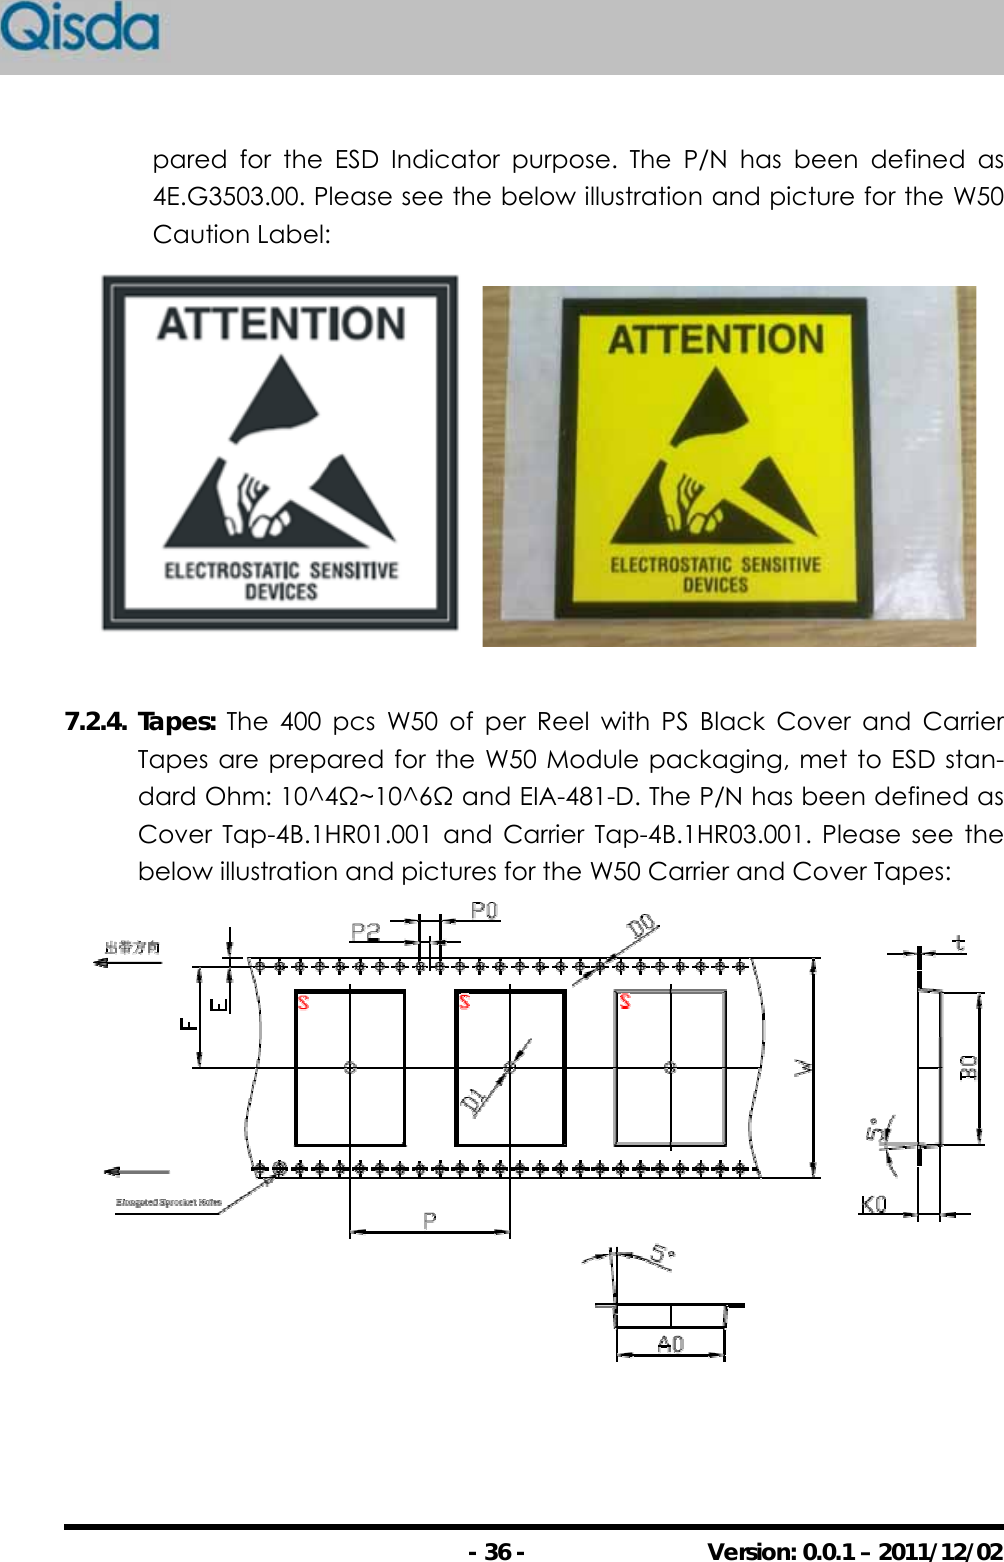                                                - 36 -  Version: 0.0.1 – 2011/12/02 pared for the ESD Indicator purpose. The P/N has been defined as 4E.G3503.00. Please see the below illustration and picture for the W50 Caution Label:   7.2.4. Tapes: The 400 pcs W50 of per Reel with PS Black Cover and Carrier Tapes are prepared for the W50 Module packaging, met to ESD stan-dard Ohm: 10^4Ω~10^6Ω and EIA-481-D. The P/N has been defined as Cover Tap-4B.1HR01.001 and Carrier Tap-4B.1HR03.001. Please see the below illustration and pictures for the W50 Carrier and Cover Tapes:  